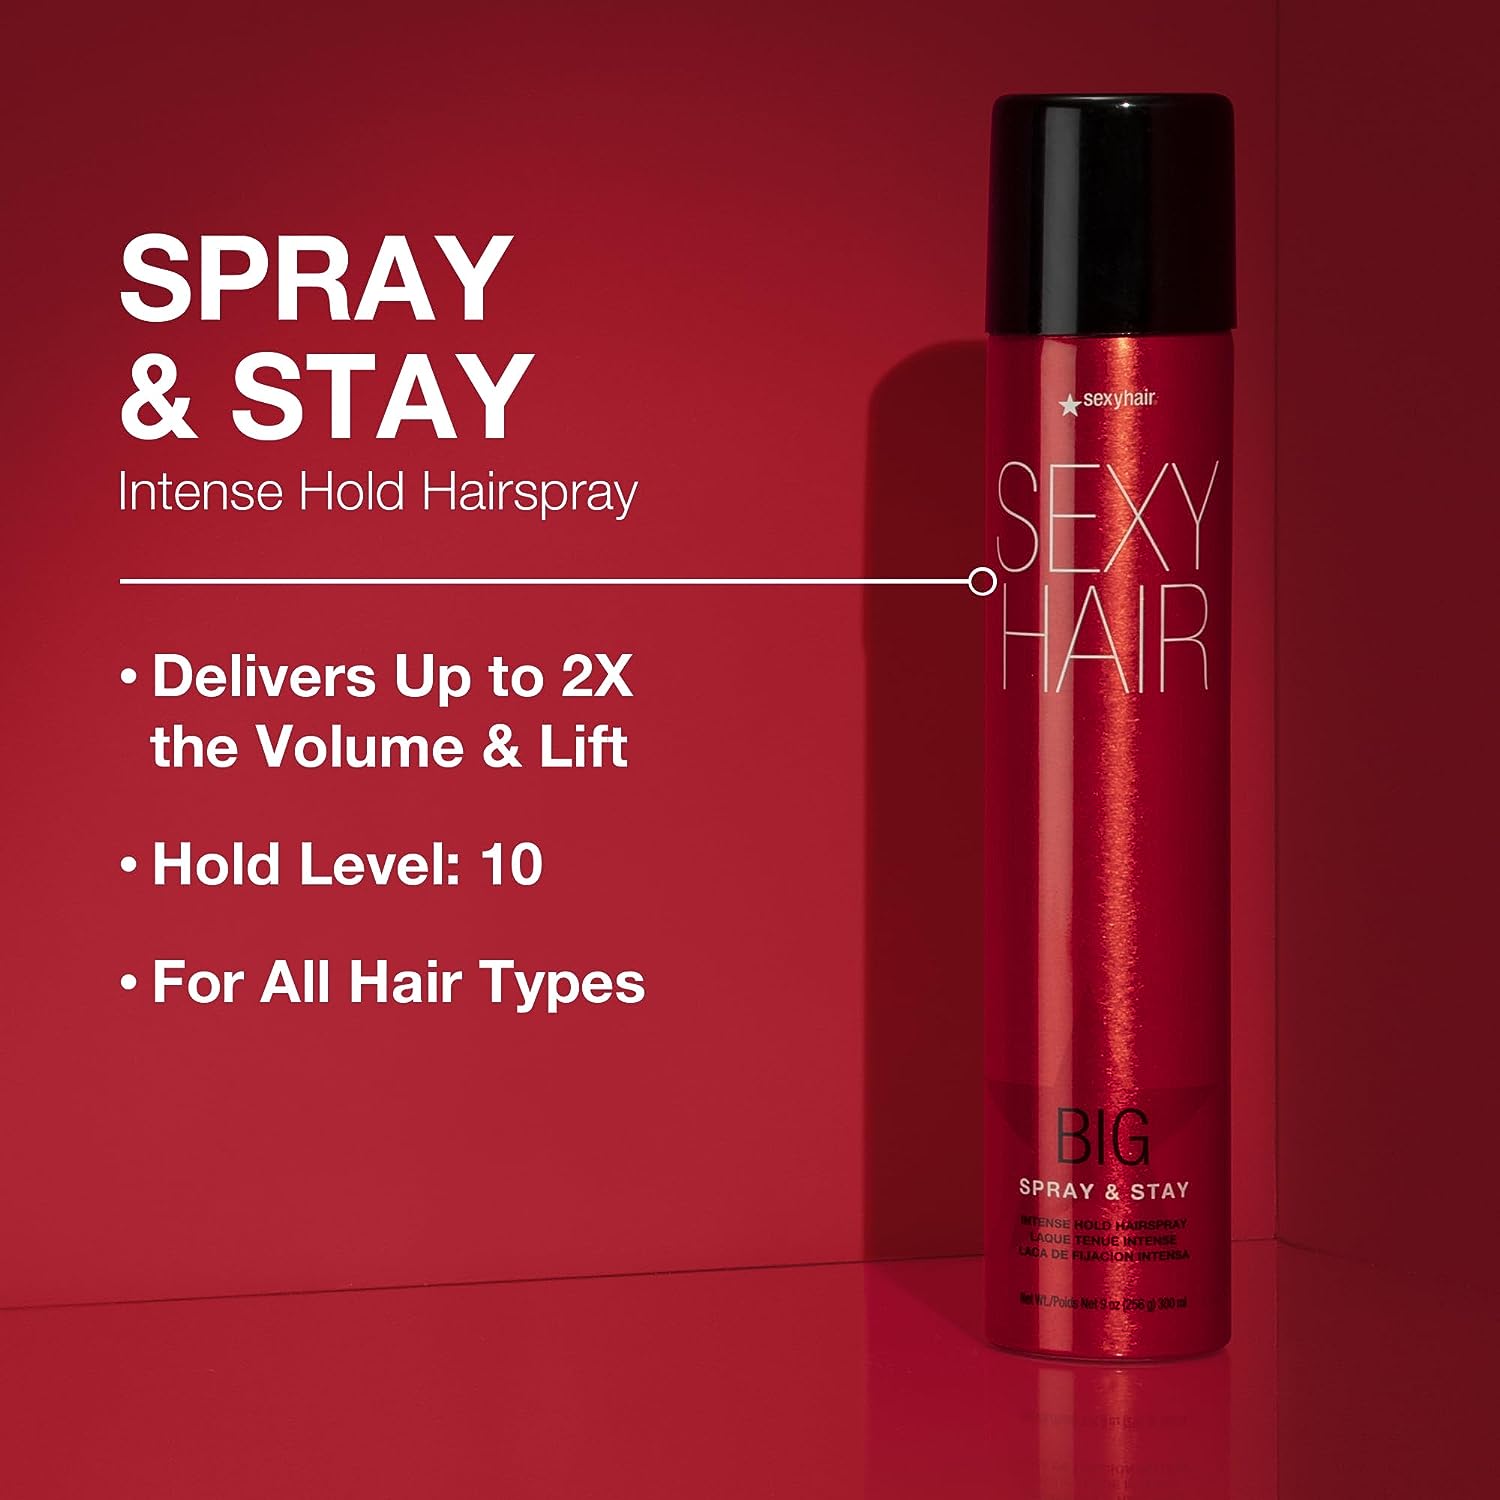 Big Sexy Hair Spray & Stay Intense Hold Hairspray Key features